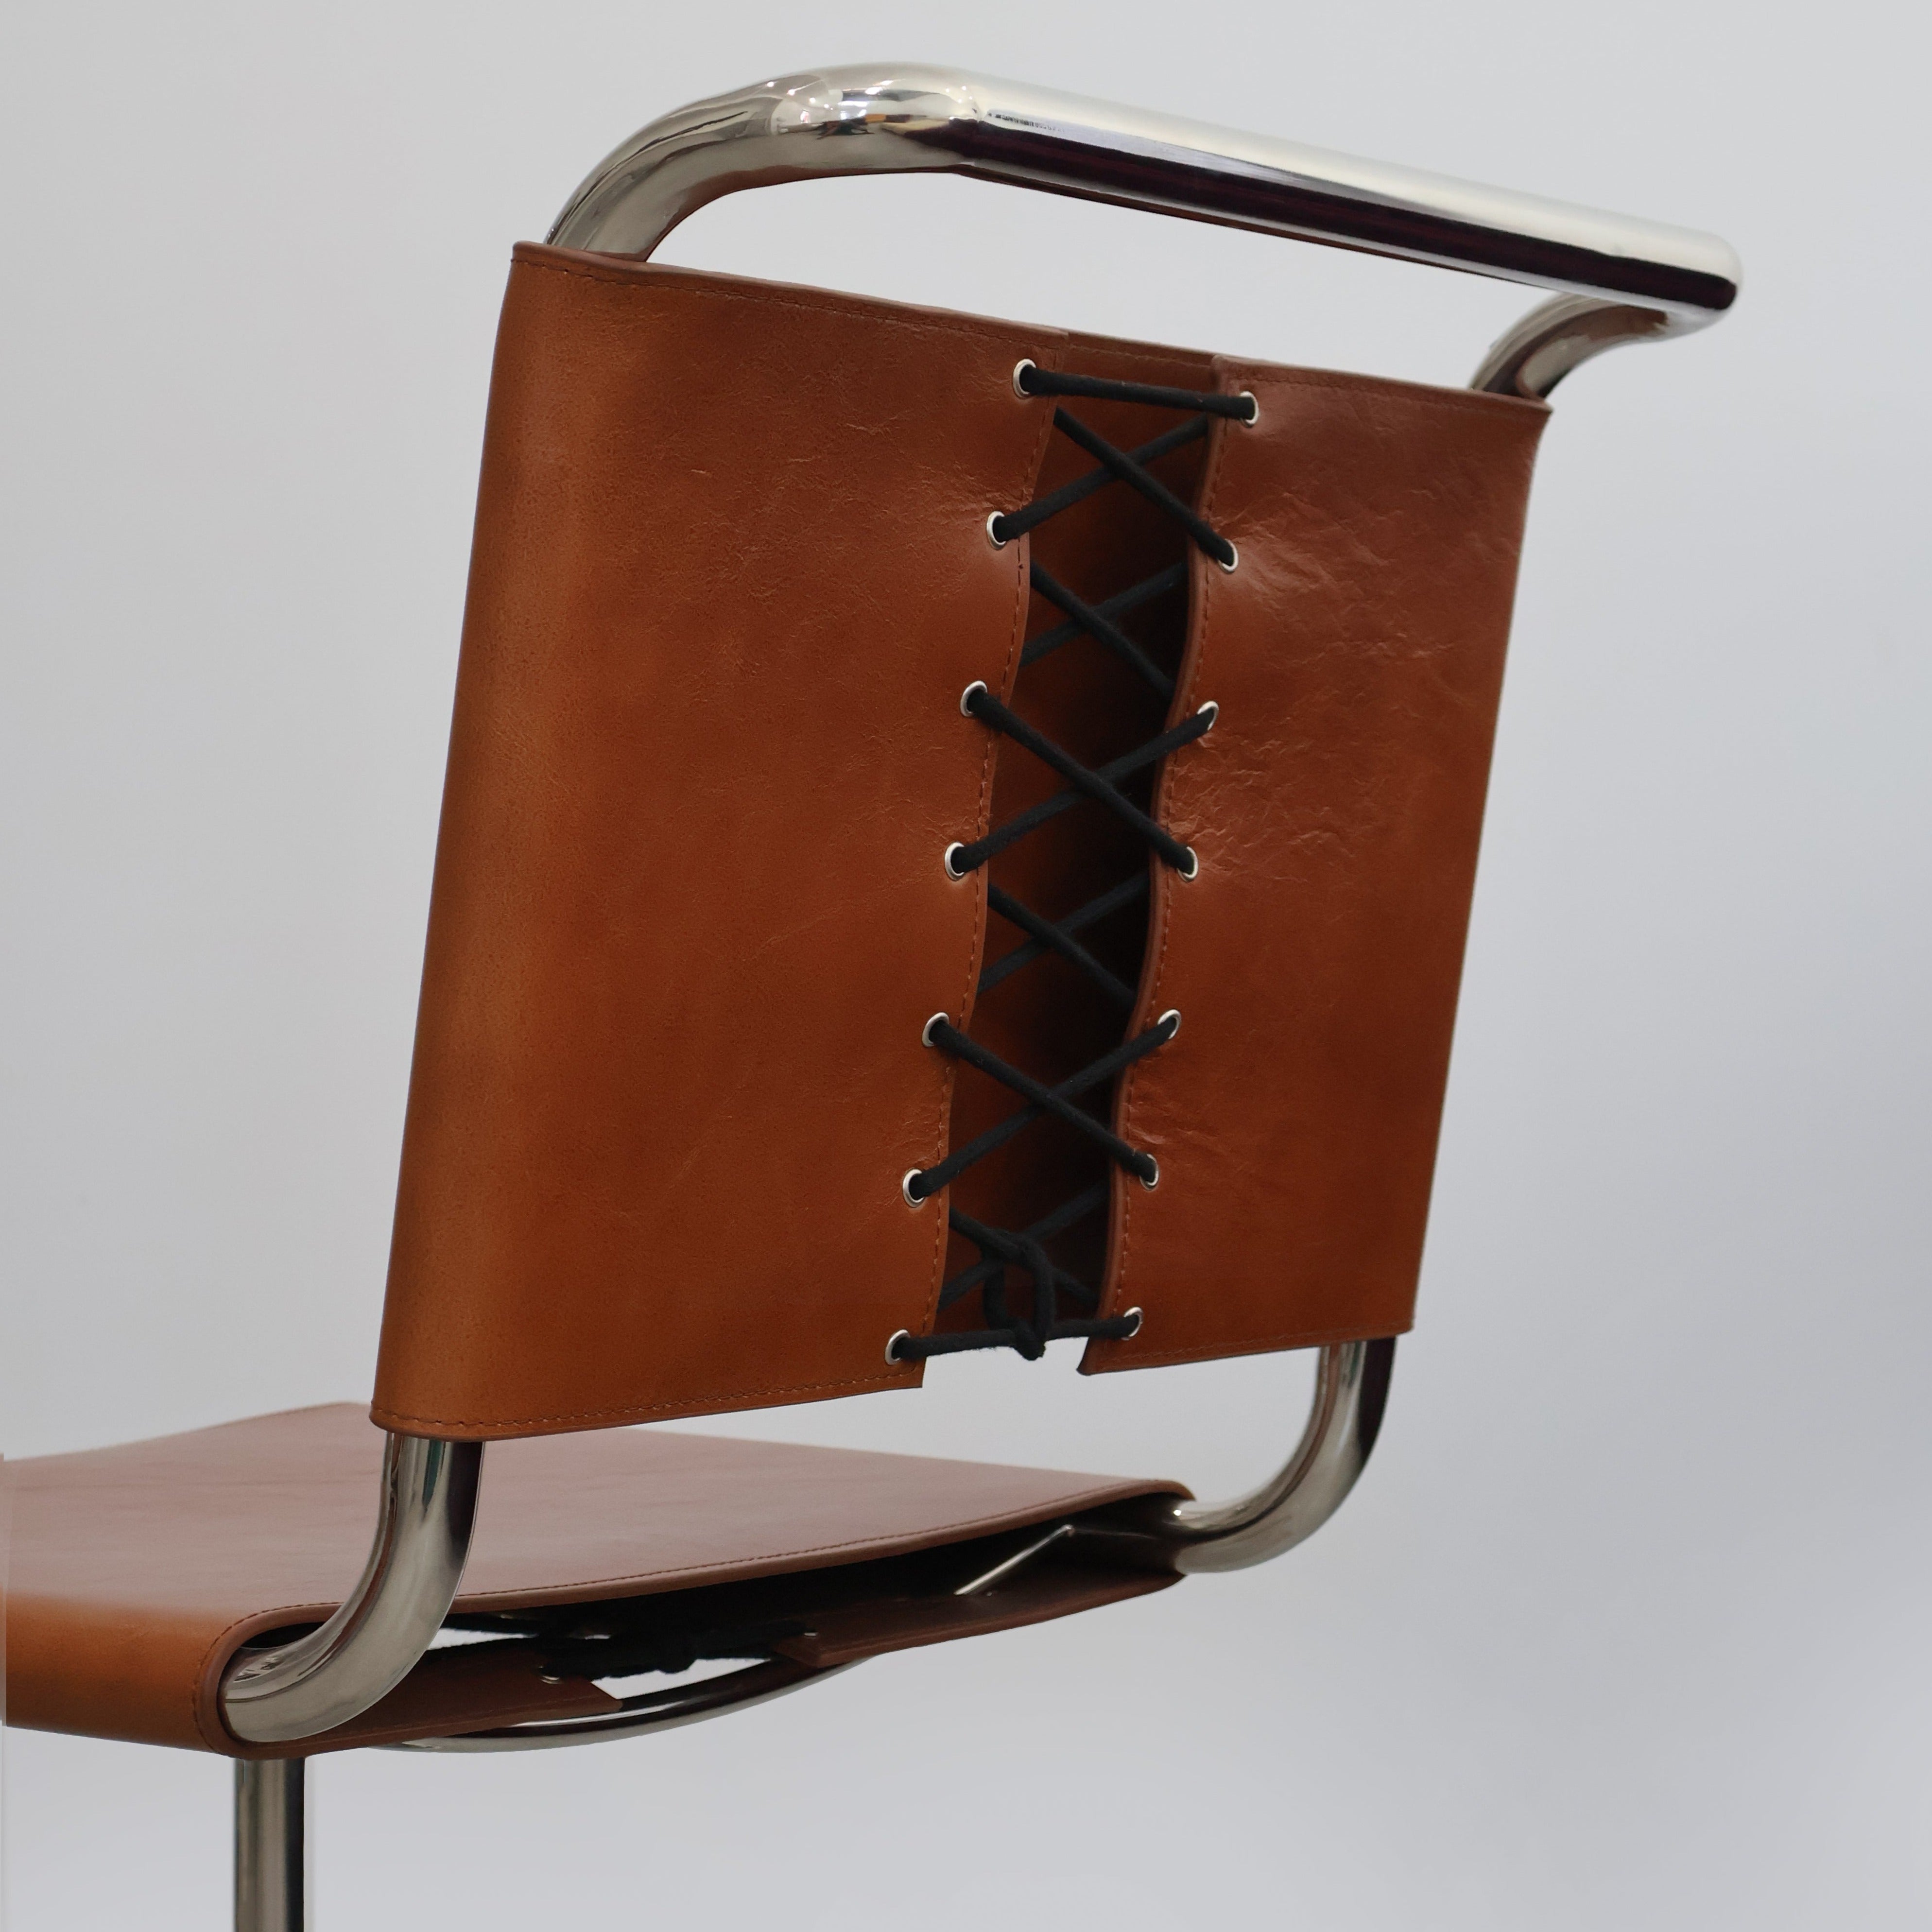 Le Corset Chair in Chestnut Vintage Leather